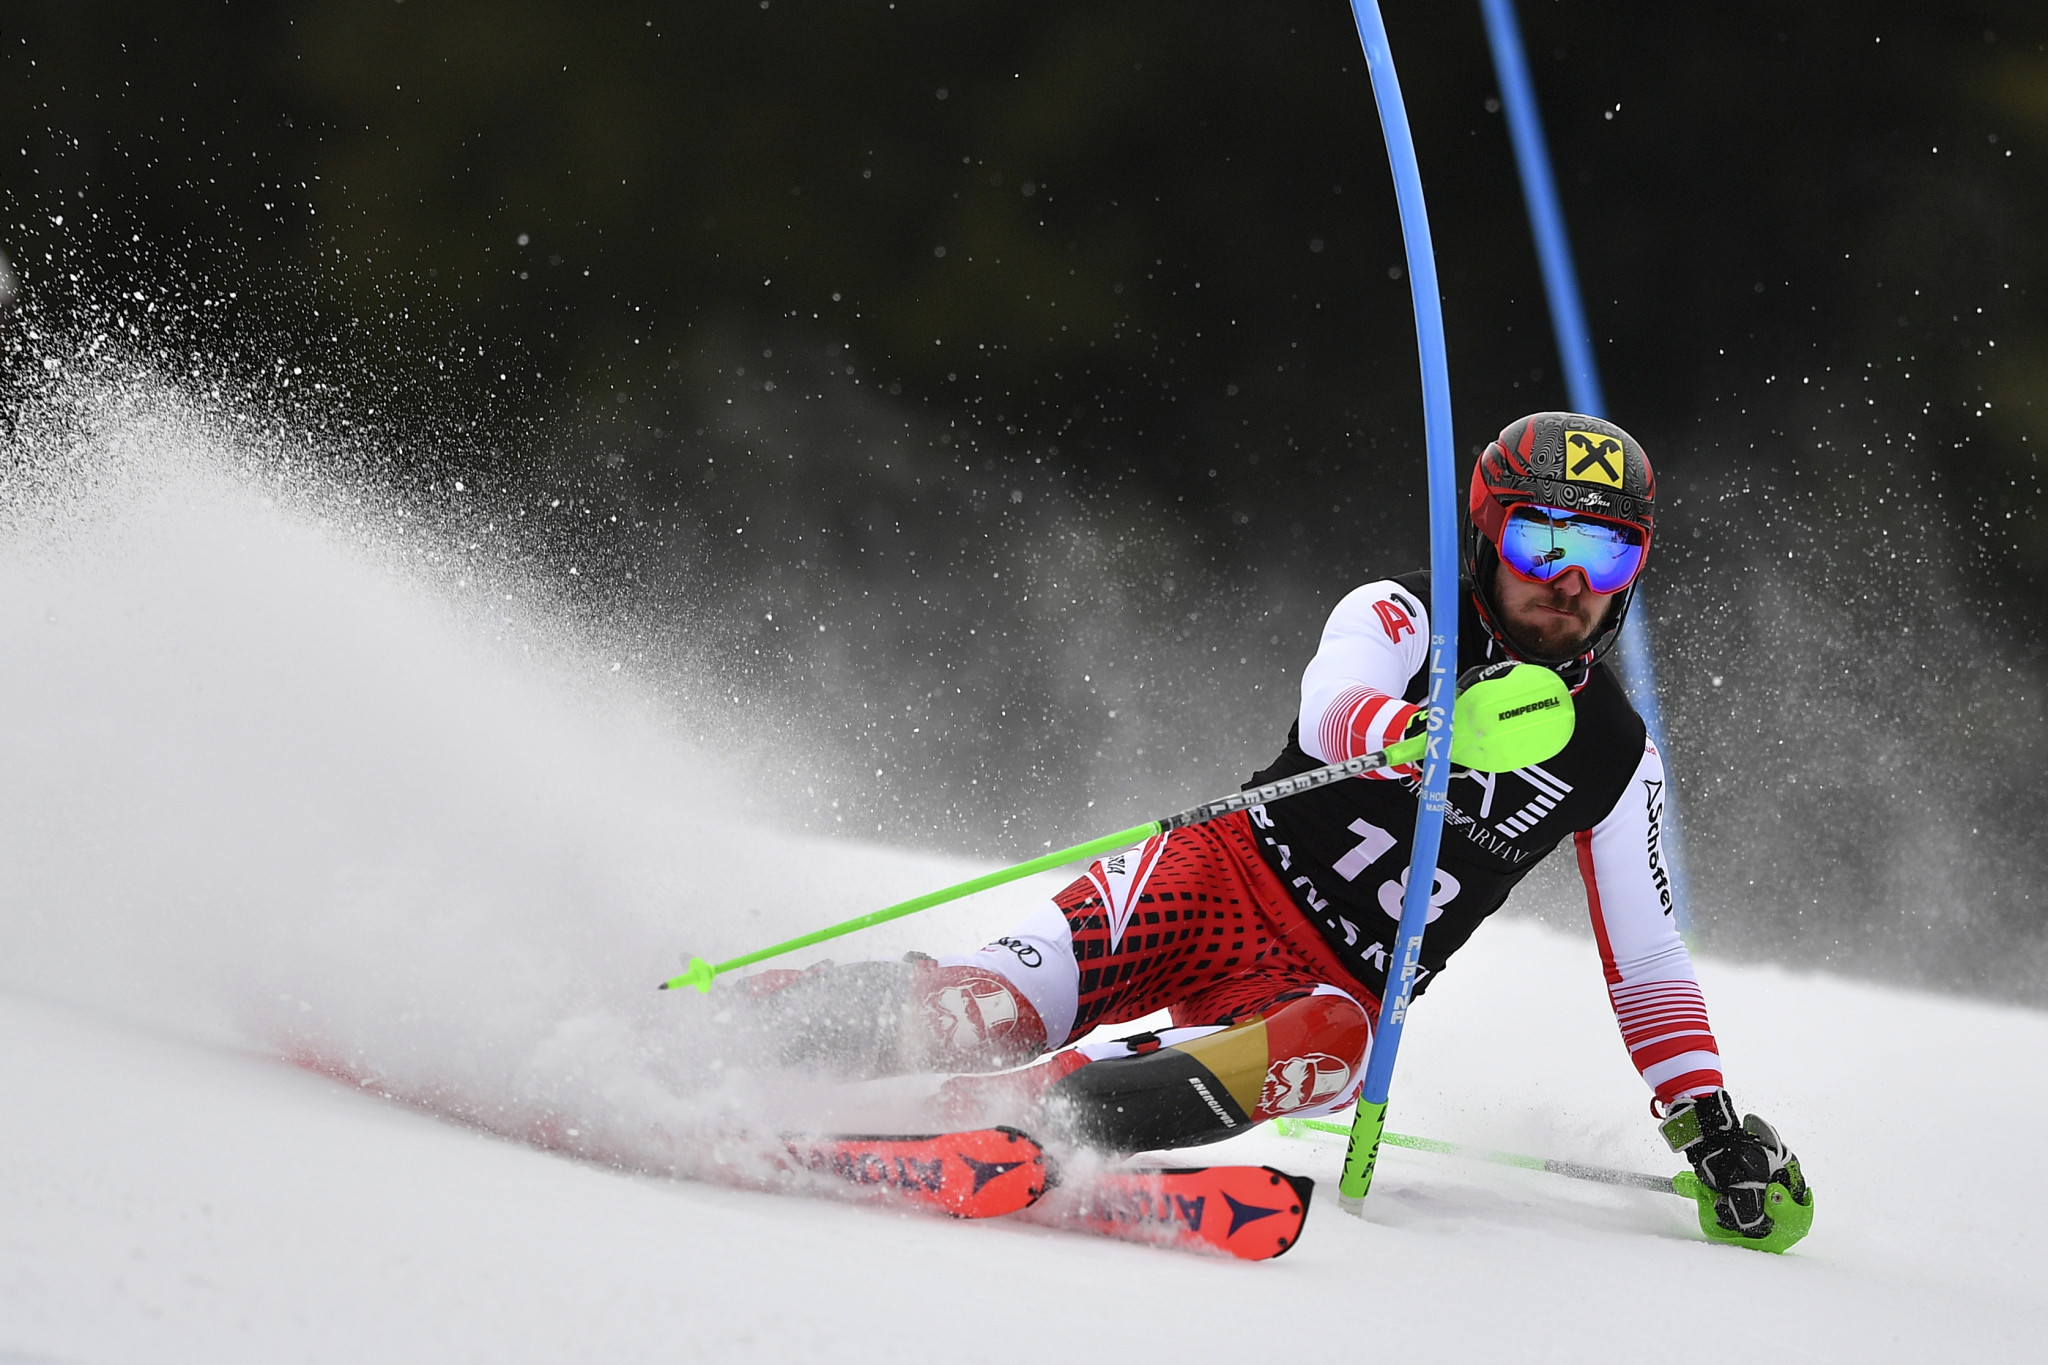 Austria's Marcel Hirscher finished in second place ©Getty Images